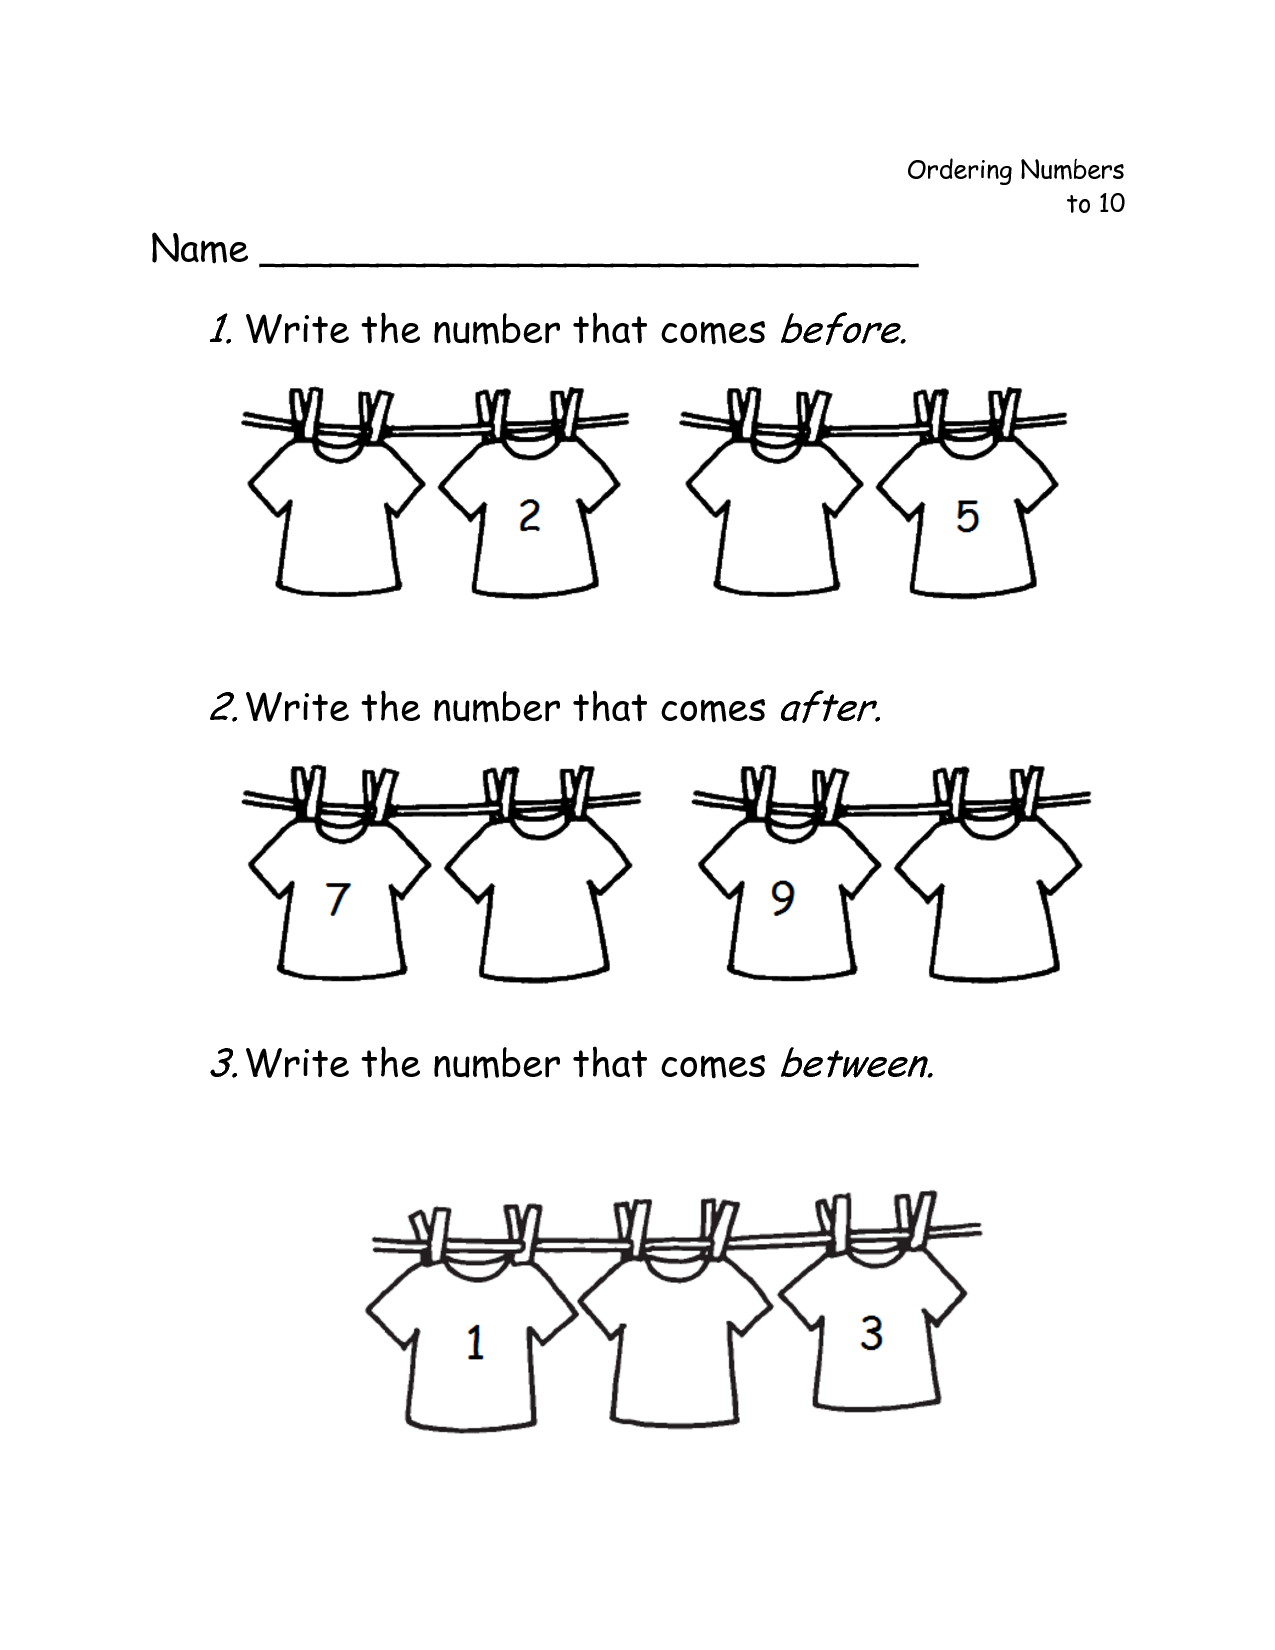 12-best-images-of-before-and-after-numbers-worksheets-math-math-worksheets-before-and-after